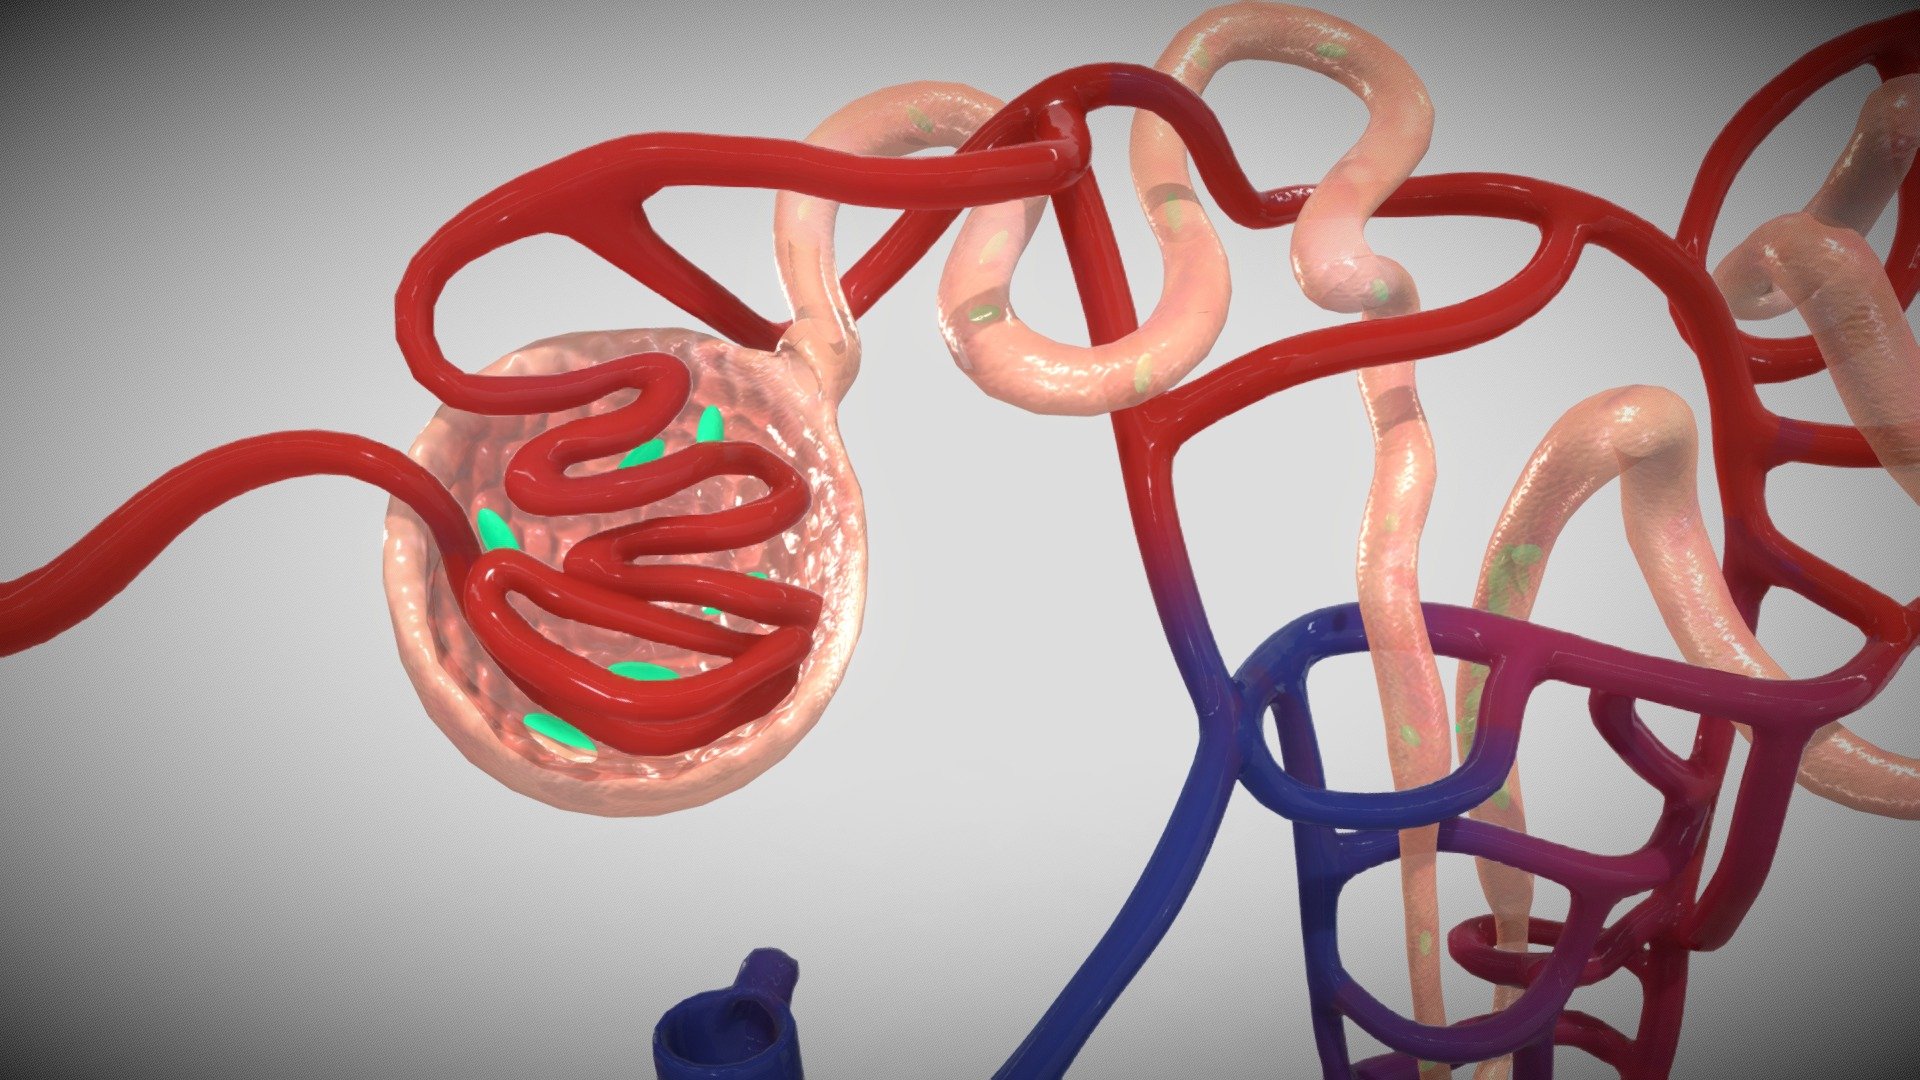 A Cluster of Proteins Implicated in Kidney Disease Is Increased in High-Density Lipoprotein Isolated from Hemodialysis Subjects.

Reference:-
https://pubs.acs.org/doi/10.1021/acs.jproteome.5b00060 - Nephron with clusters - Buy Royalty Free 3D model by Ebers 3d model